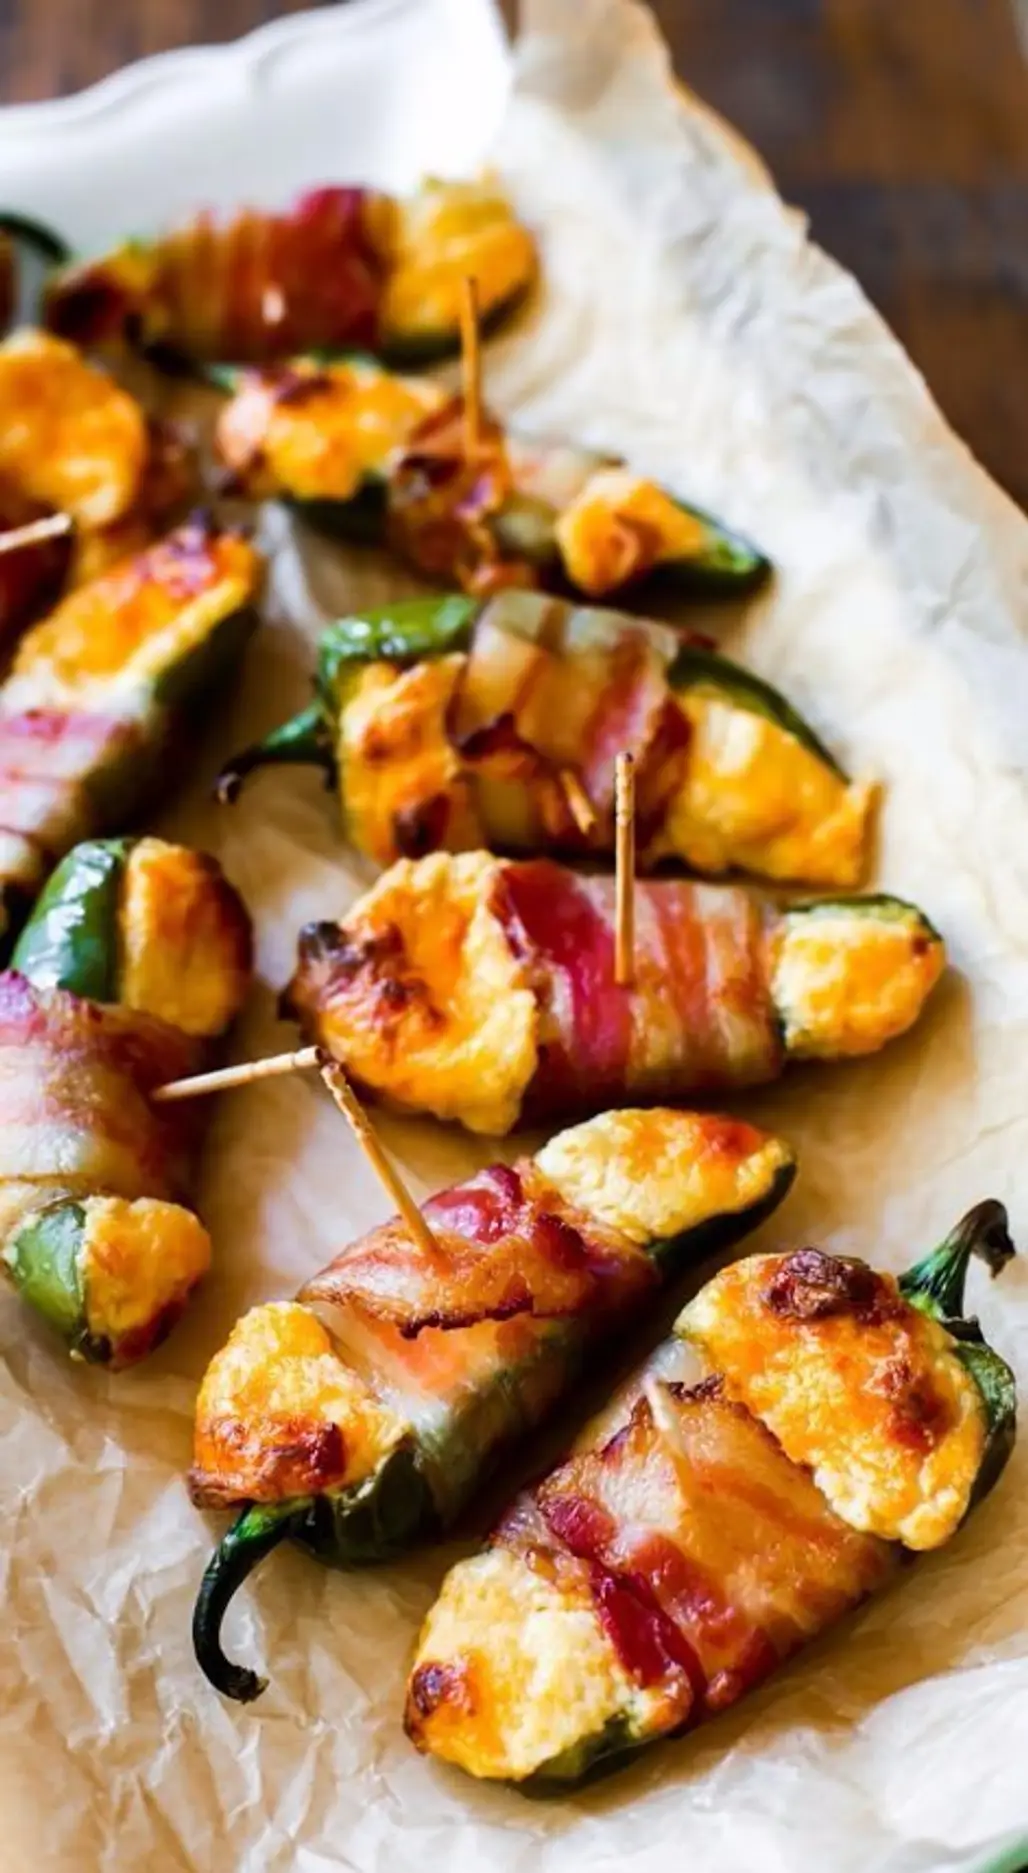 Wrap Jalapenos Stuffed with Cheese